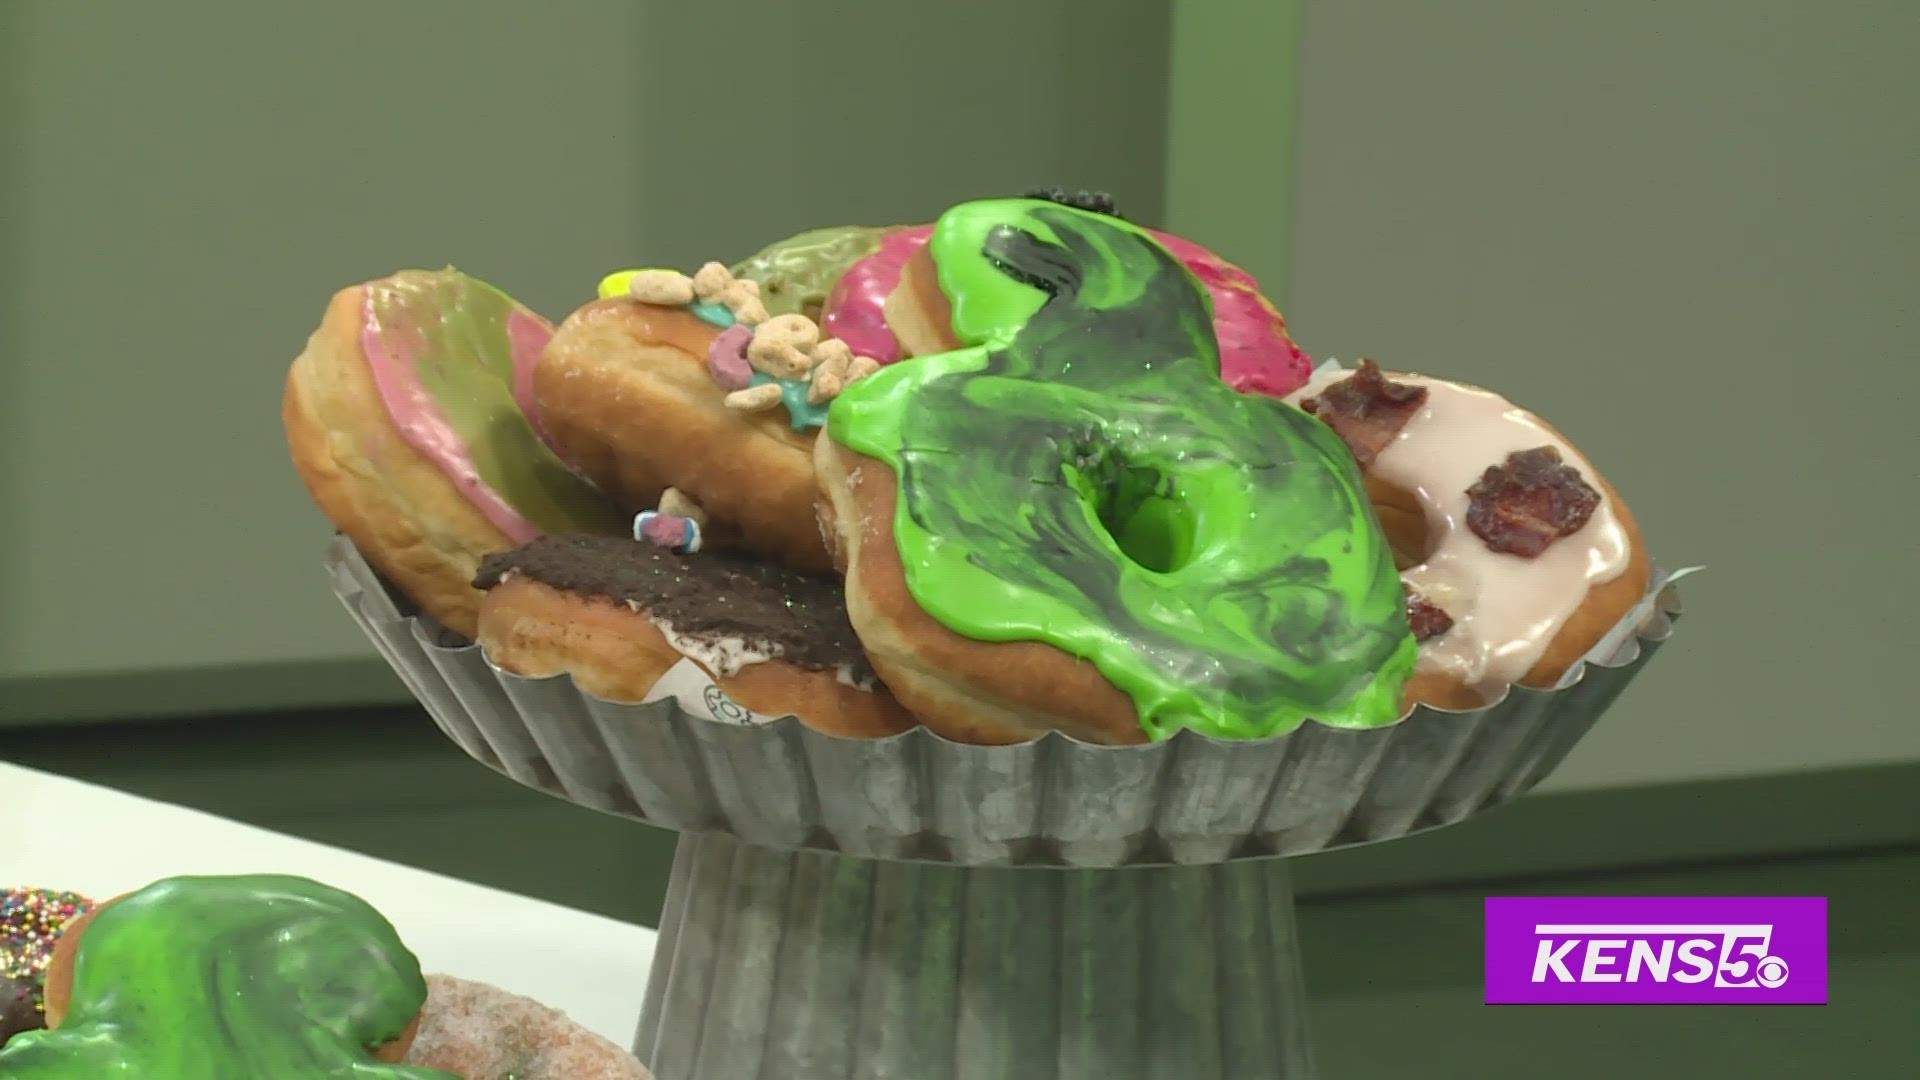 Andrea Aguirre with Art of Donut decorates a St. Patrick's Day-themed donut with Clarke.